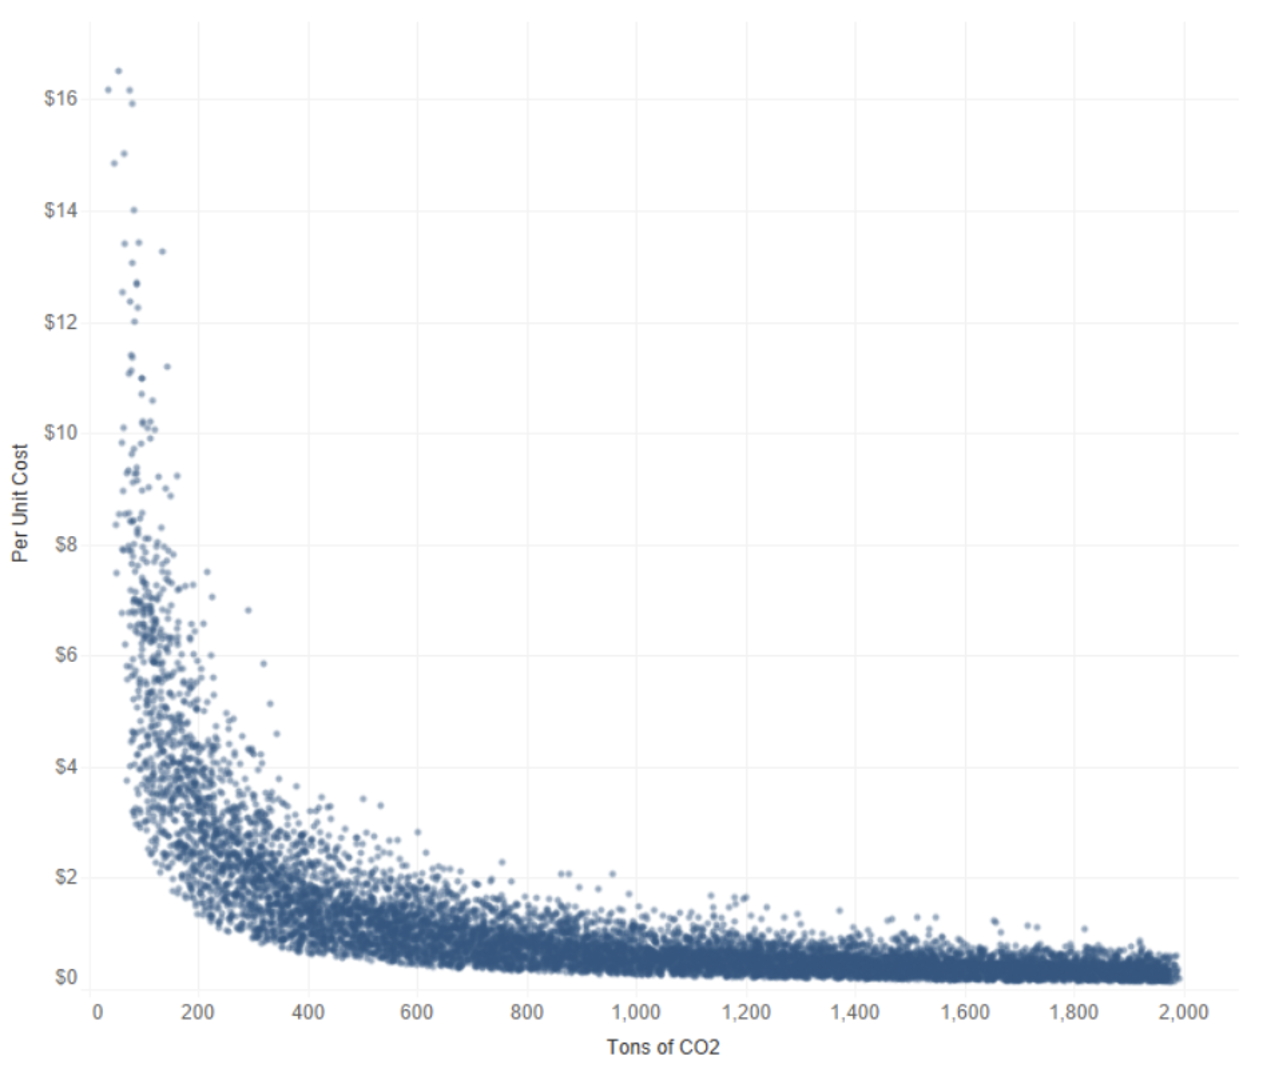 Scatterplot with "Tons of CO2" on x axis and "Per Unit Cost" on y axis